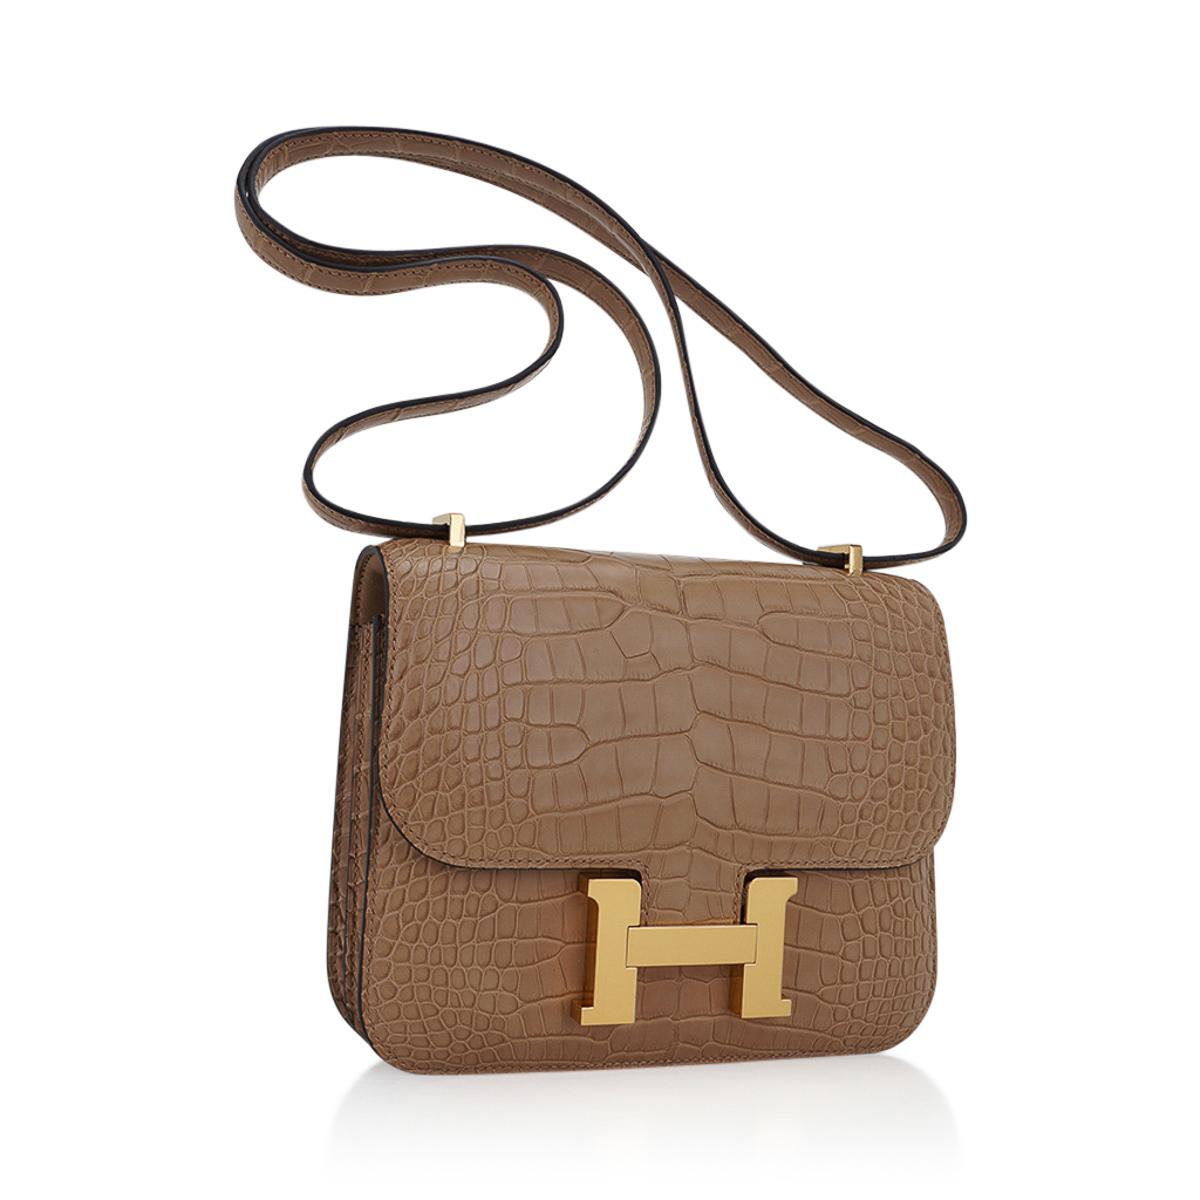 Mightychic offers an Hermes 18 Constance in warm Chai Matte Alligator.
A cross between toffee and chai tea this bag is delectable!
Accentuated with Gold hardware.
The effect is understated and rich.
Hermes Paris Made in France is stamped on front